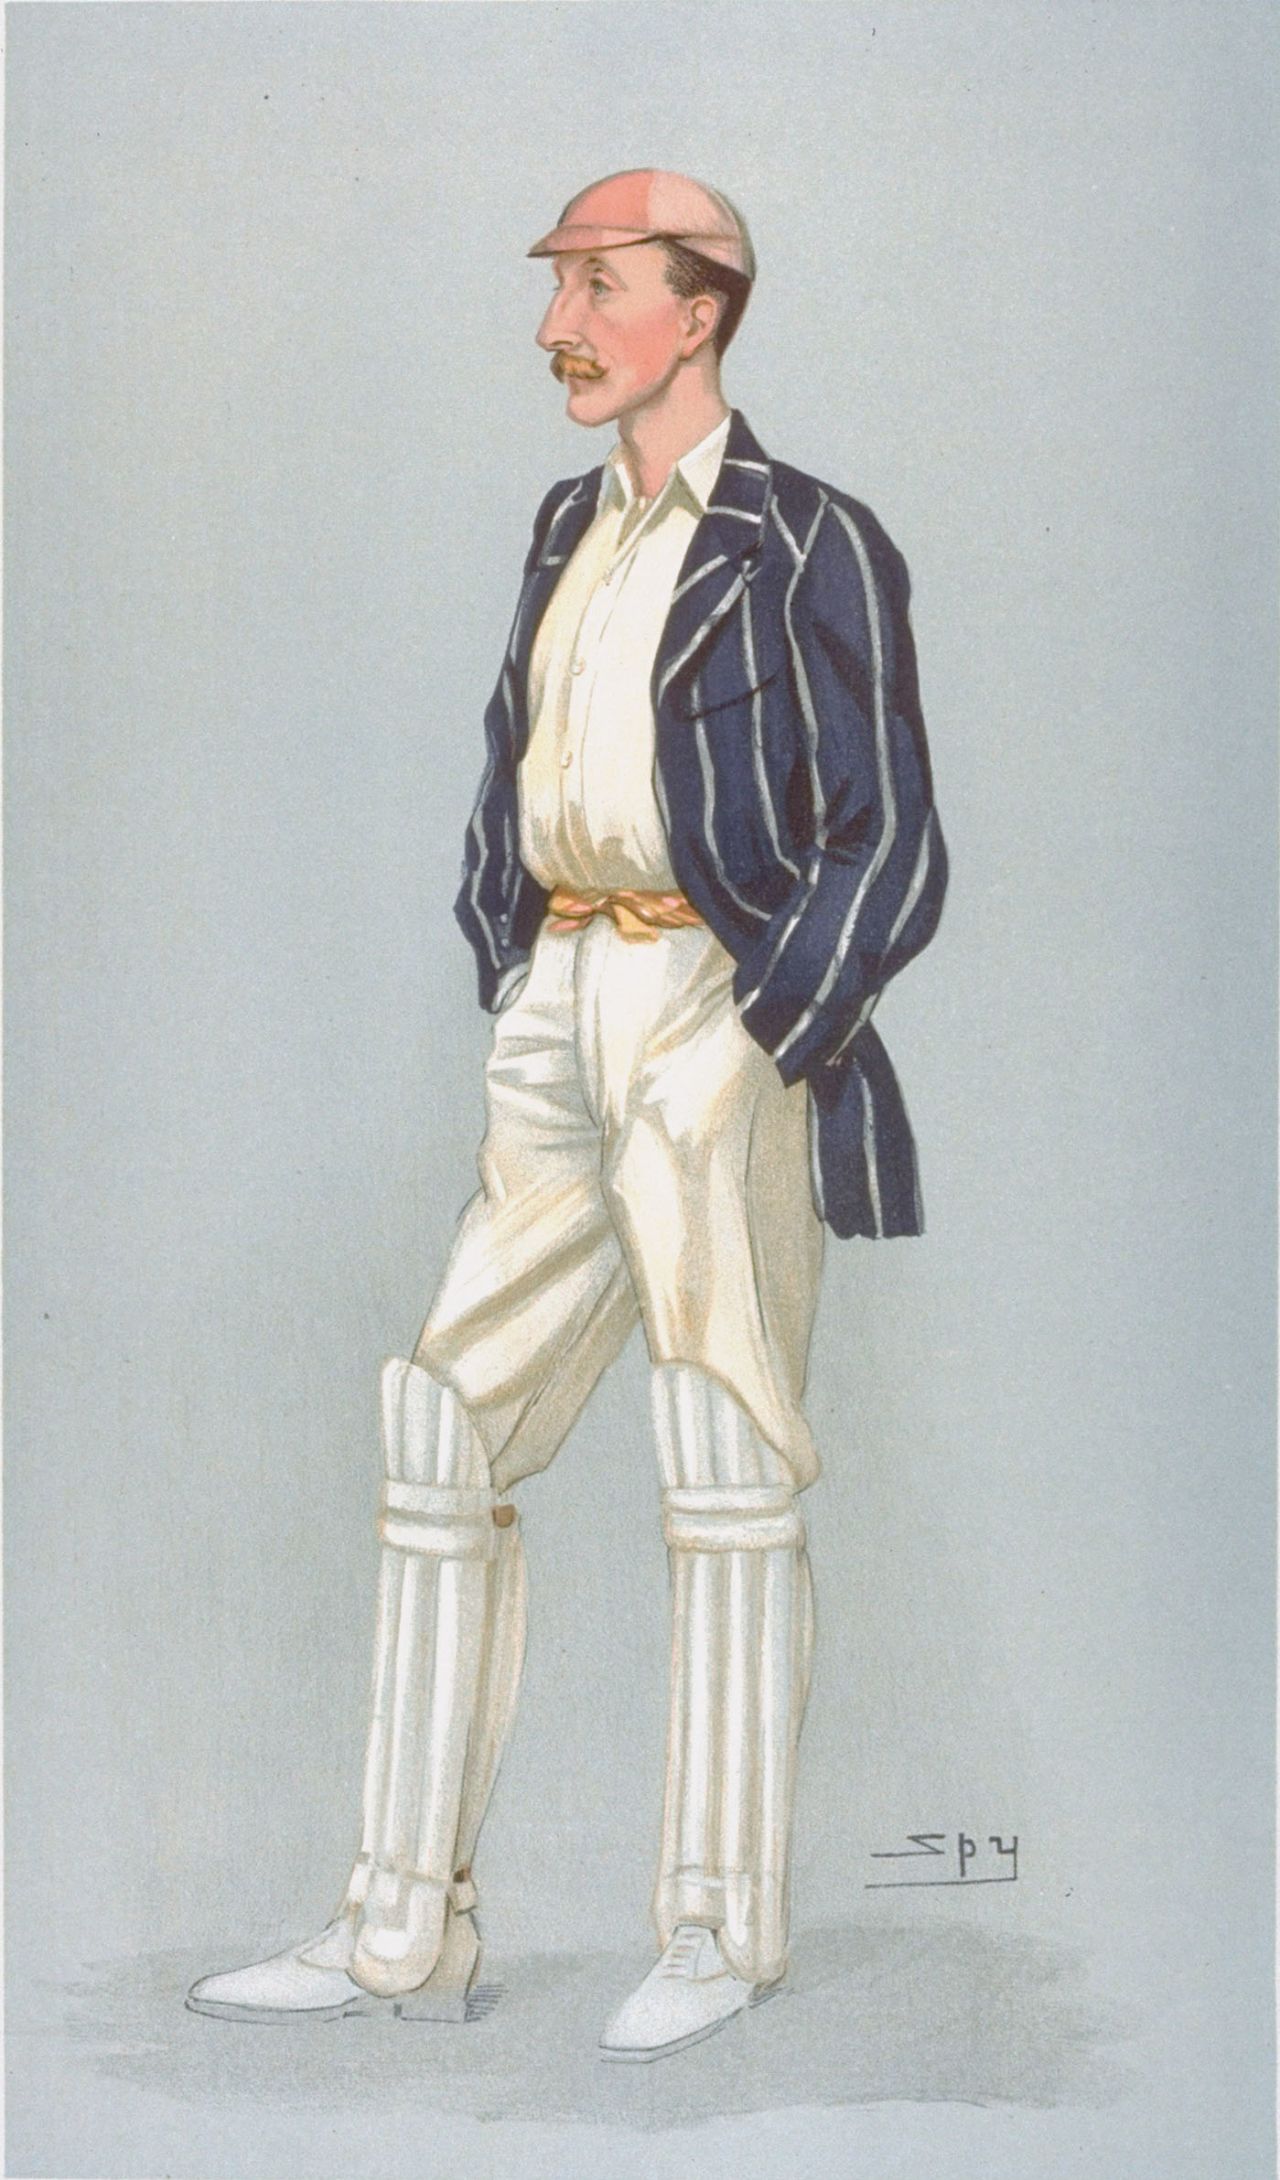 Lionel Palairet, drawn by "Spy" for Vanity Fair magazine, January 1, 1903